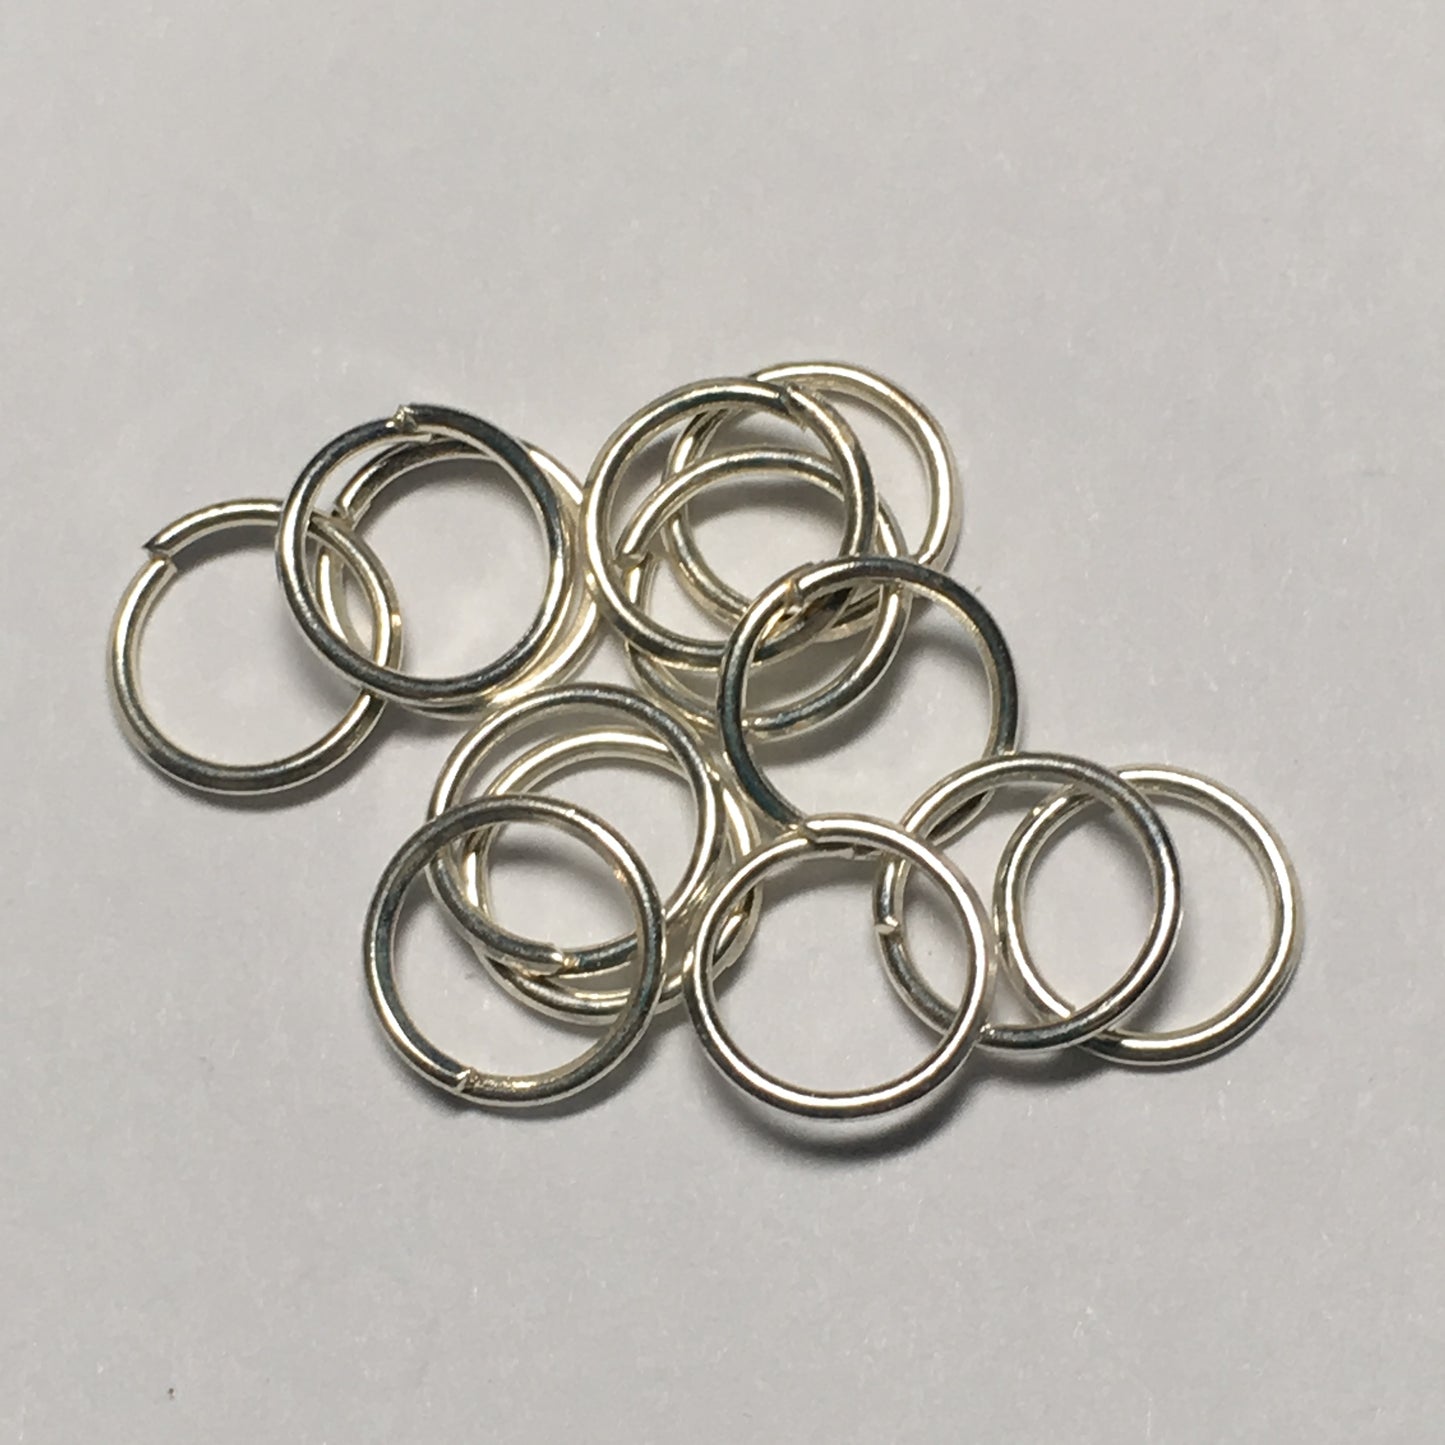 7 mm 21-Gauge Silver Plated 0.71 mm Unsoldered Split Jump Rings - 13 Rings